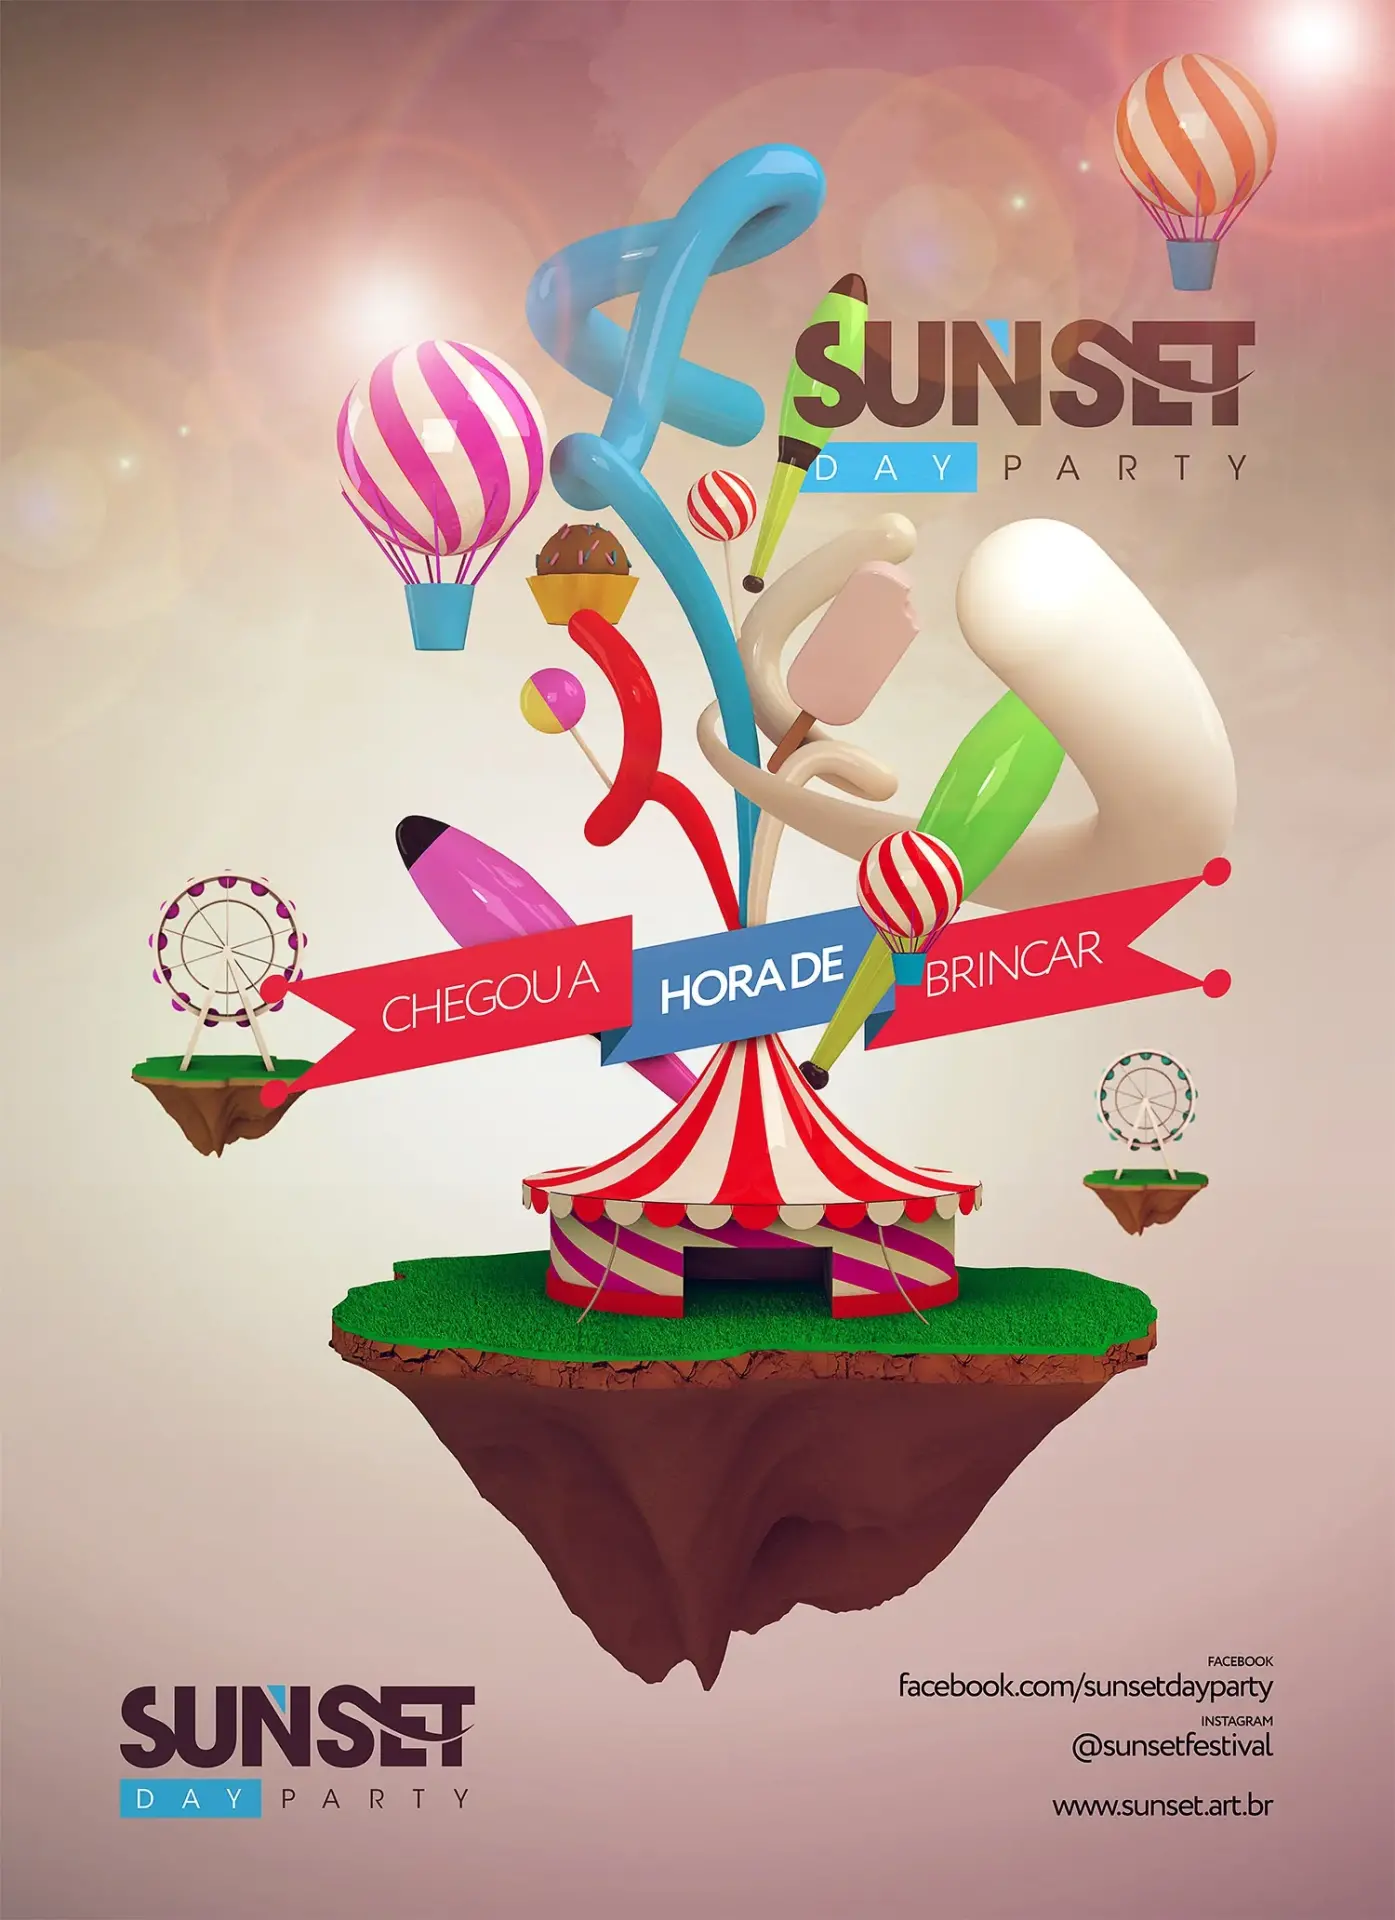 Sunset day party